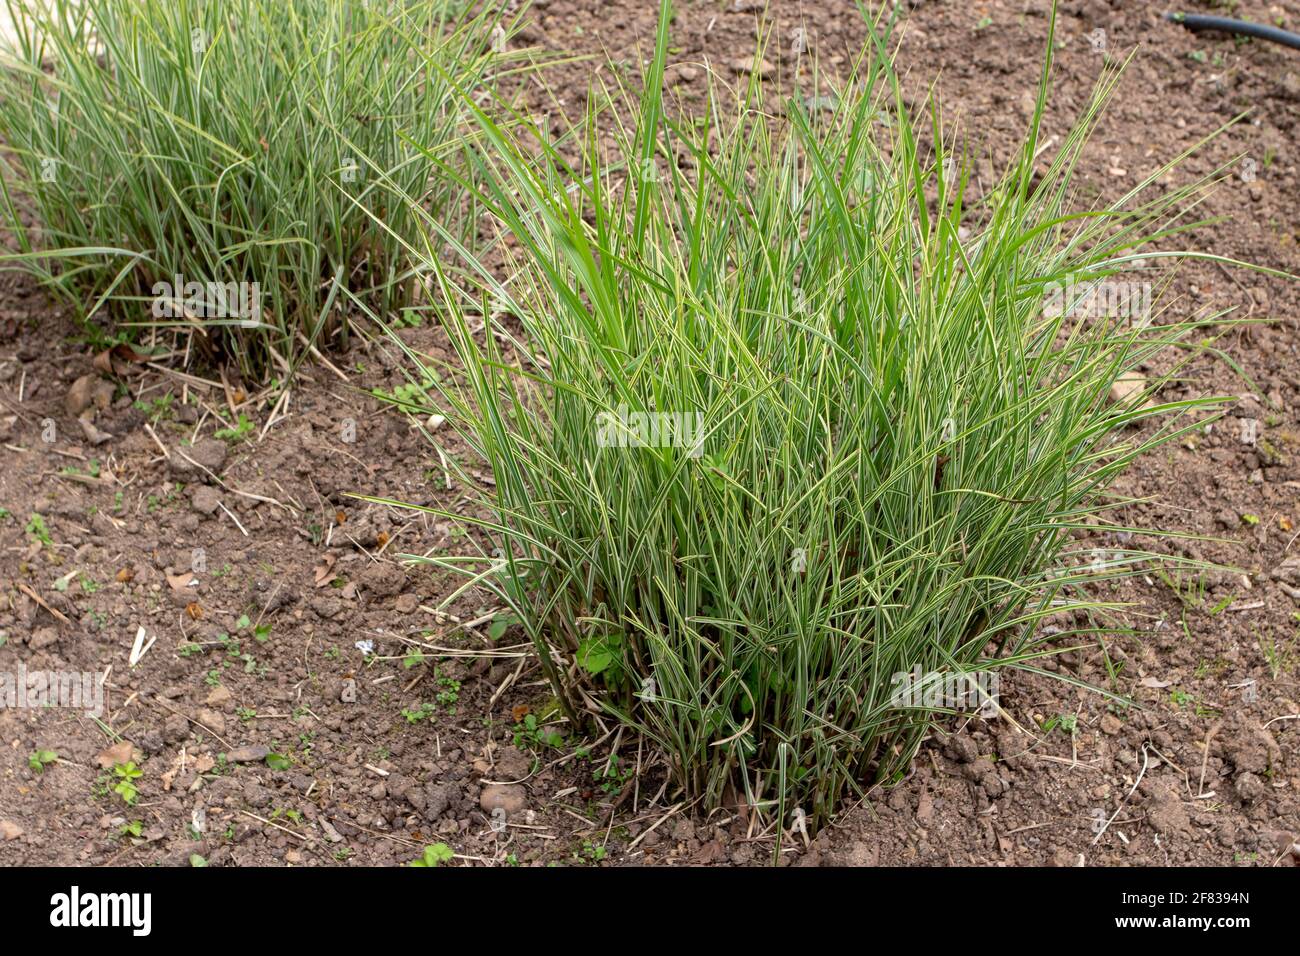 Miscanthus sinensis or eulalia or Chinese silver grass plants Stock Photo